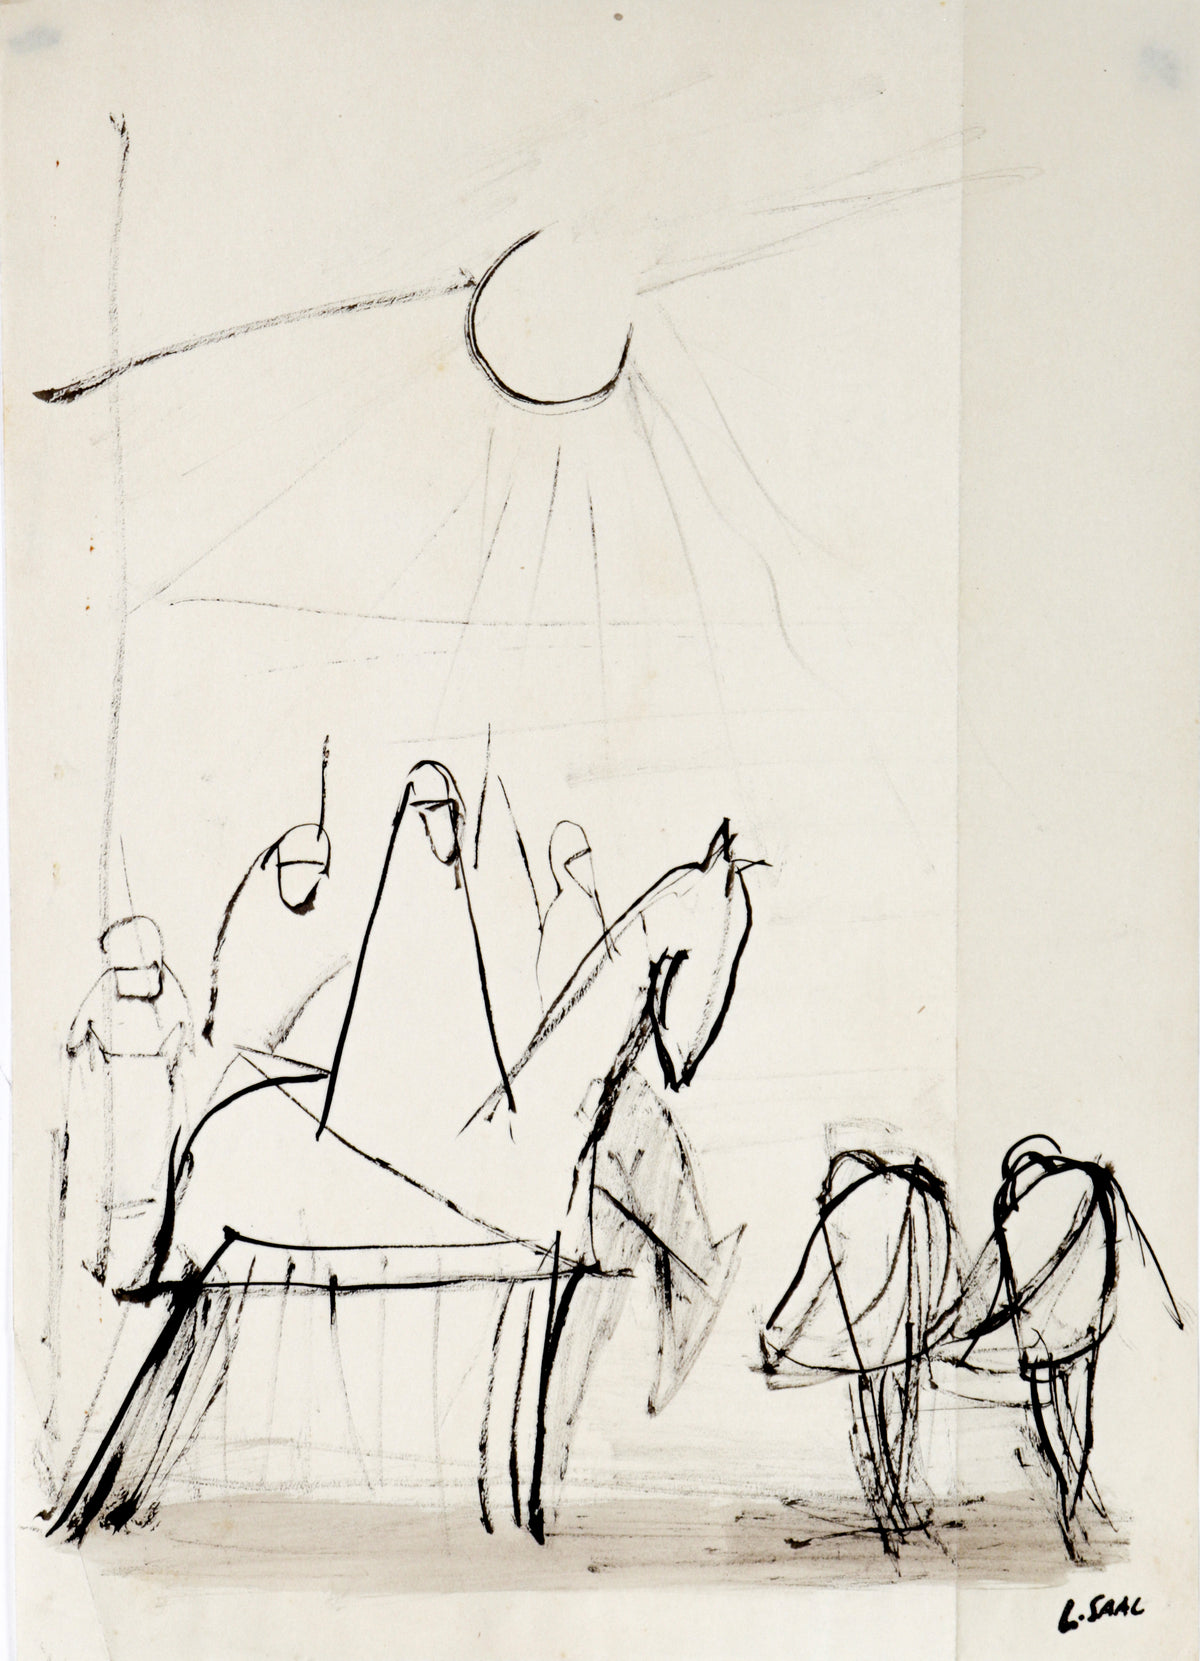 Figurative Abstract Scene with Horse Rider&lt;br&gt;1944 Ink&lt;br&gt;&lt;br&gt;#C1720